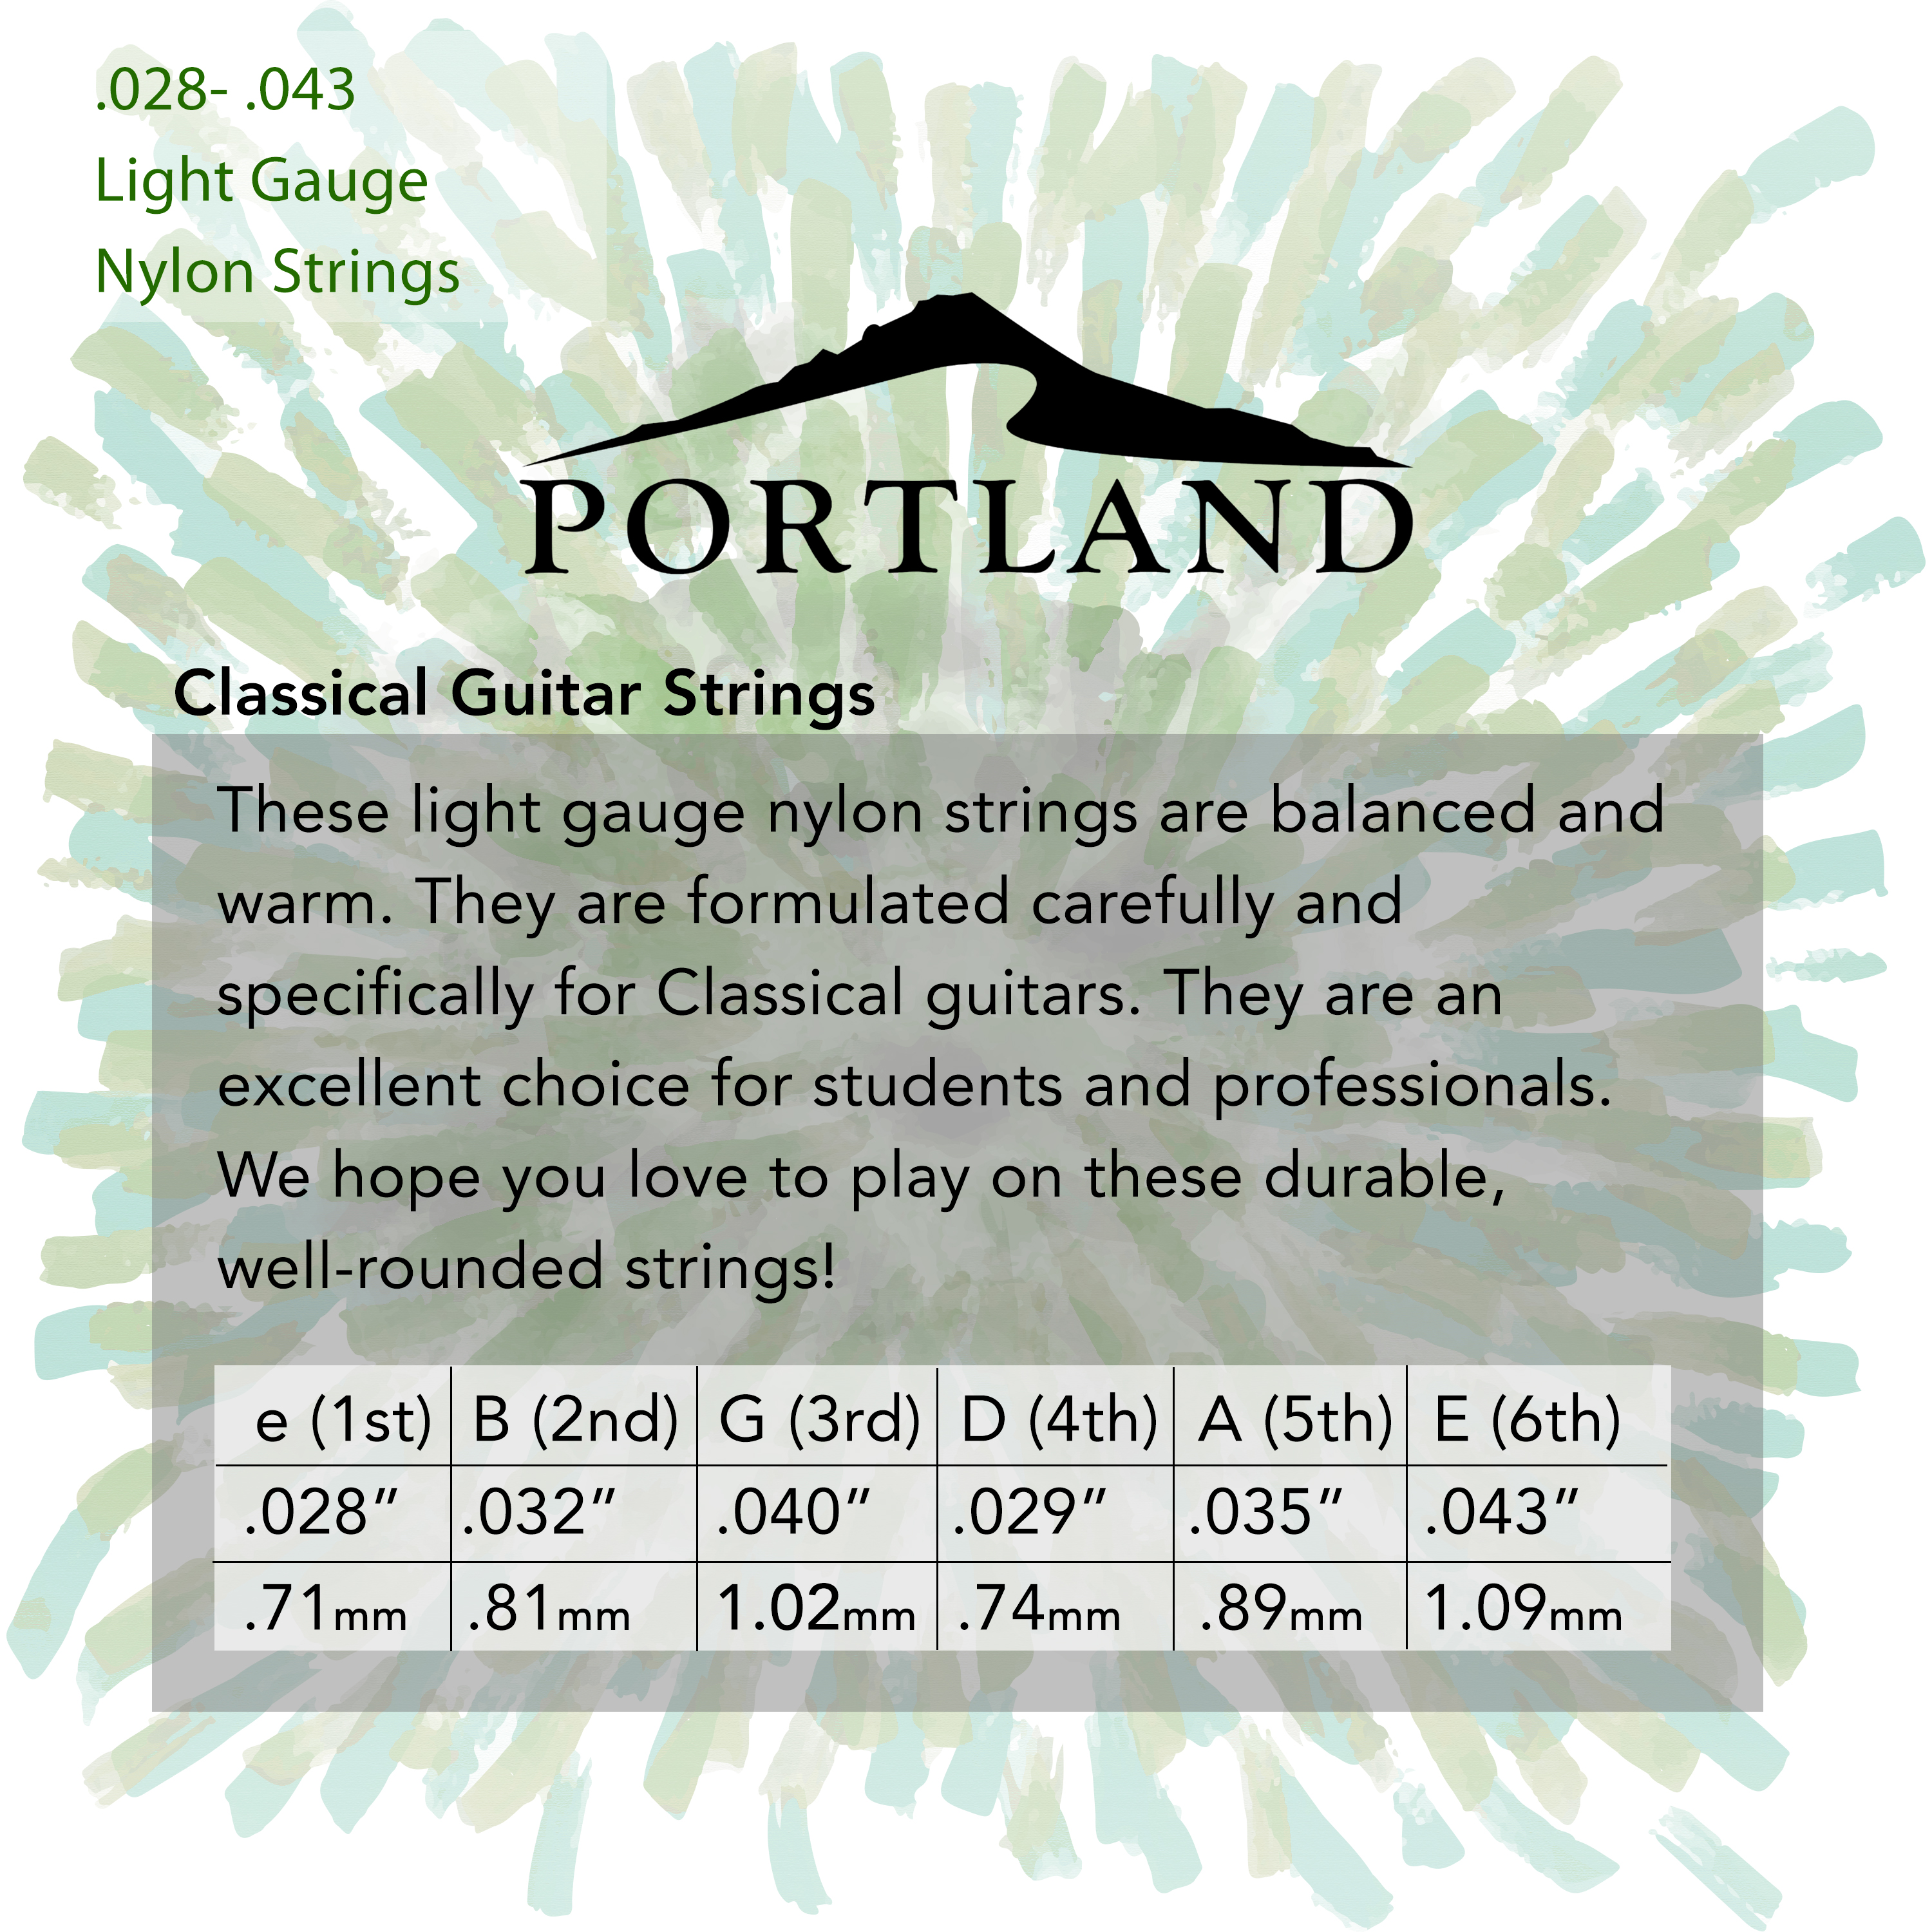 Portland Nylon Classical Guitar Strings in action